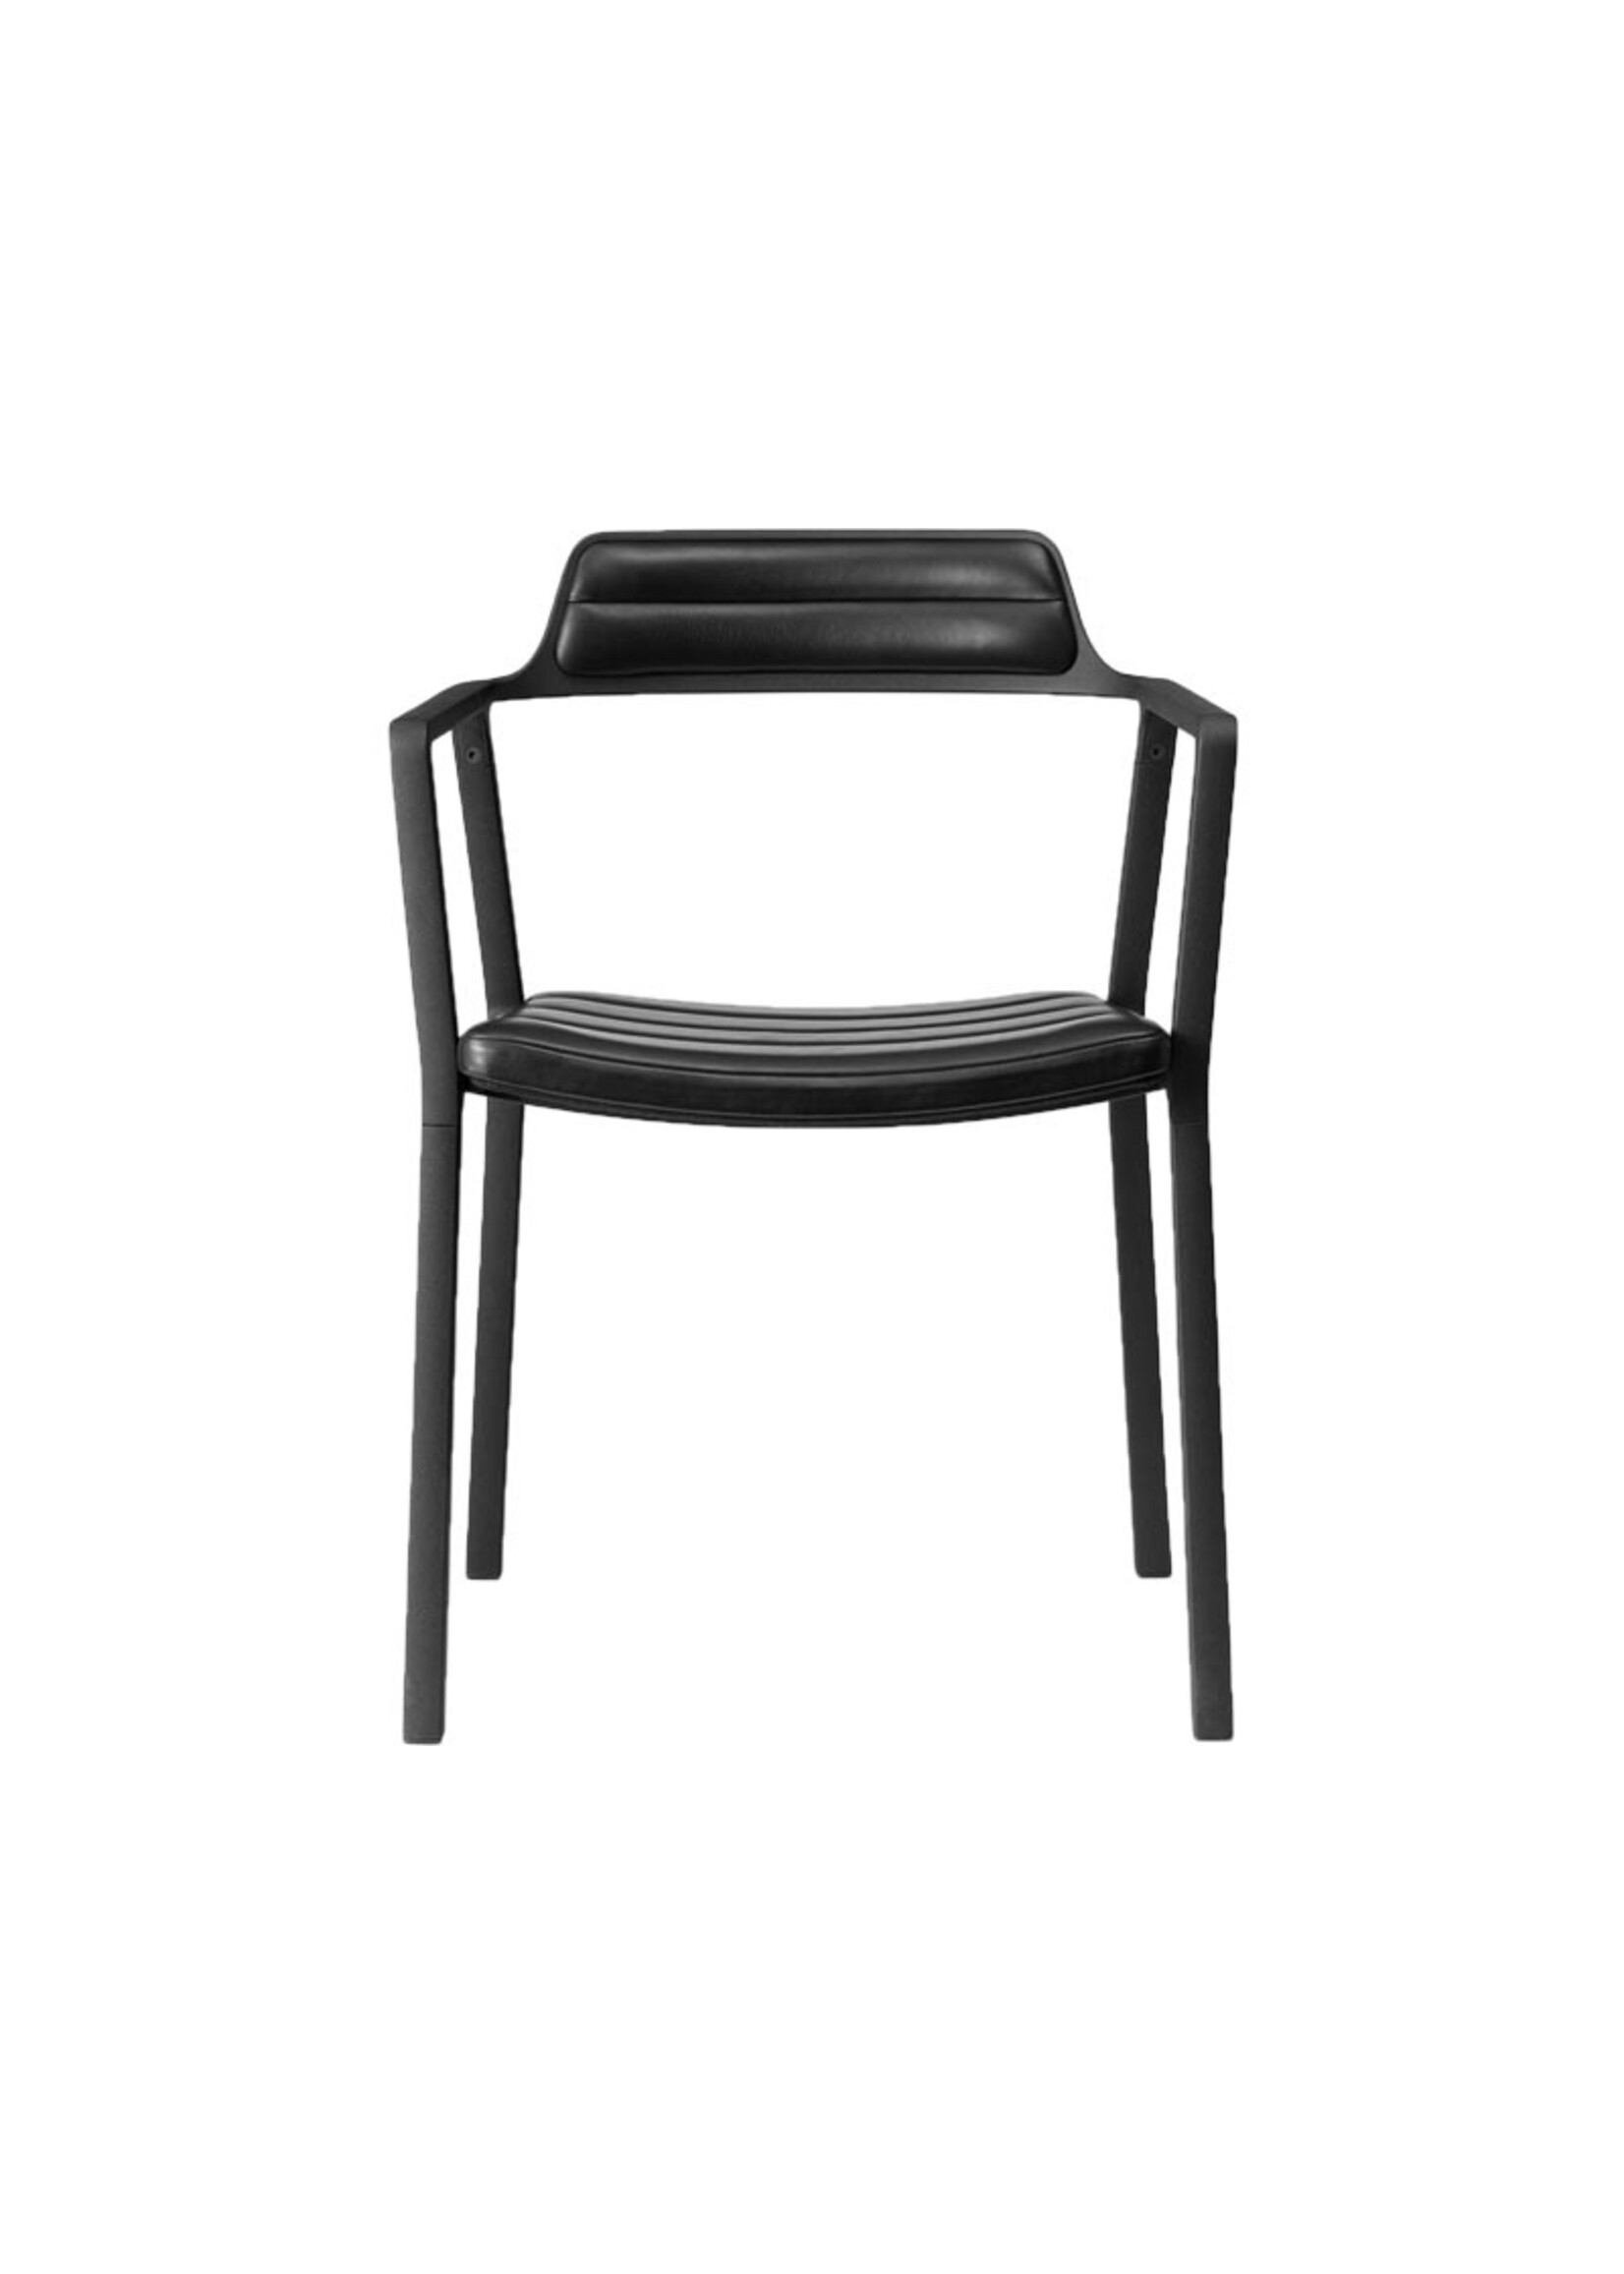 Vipp 451 Chair Black Leather